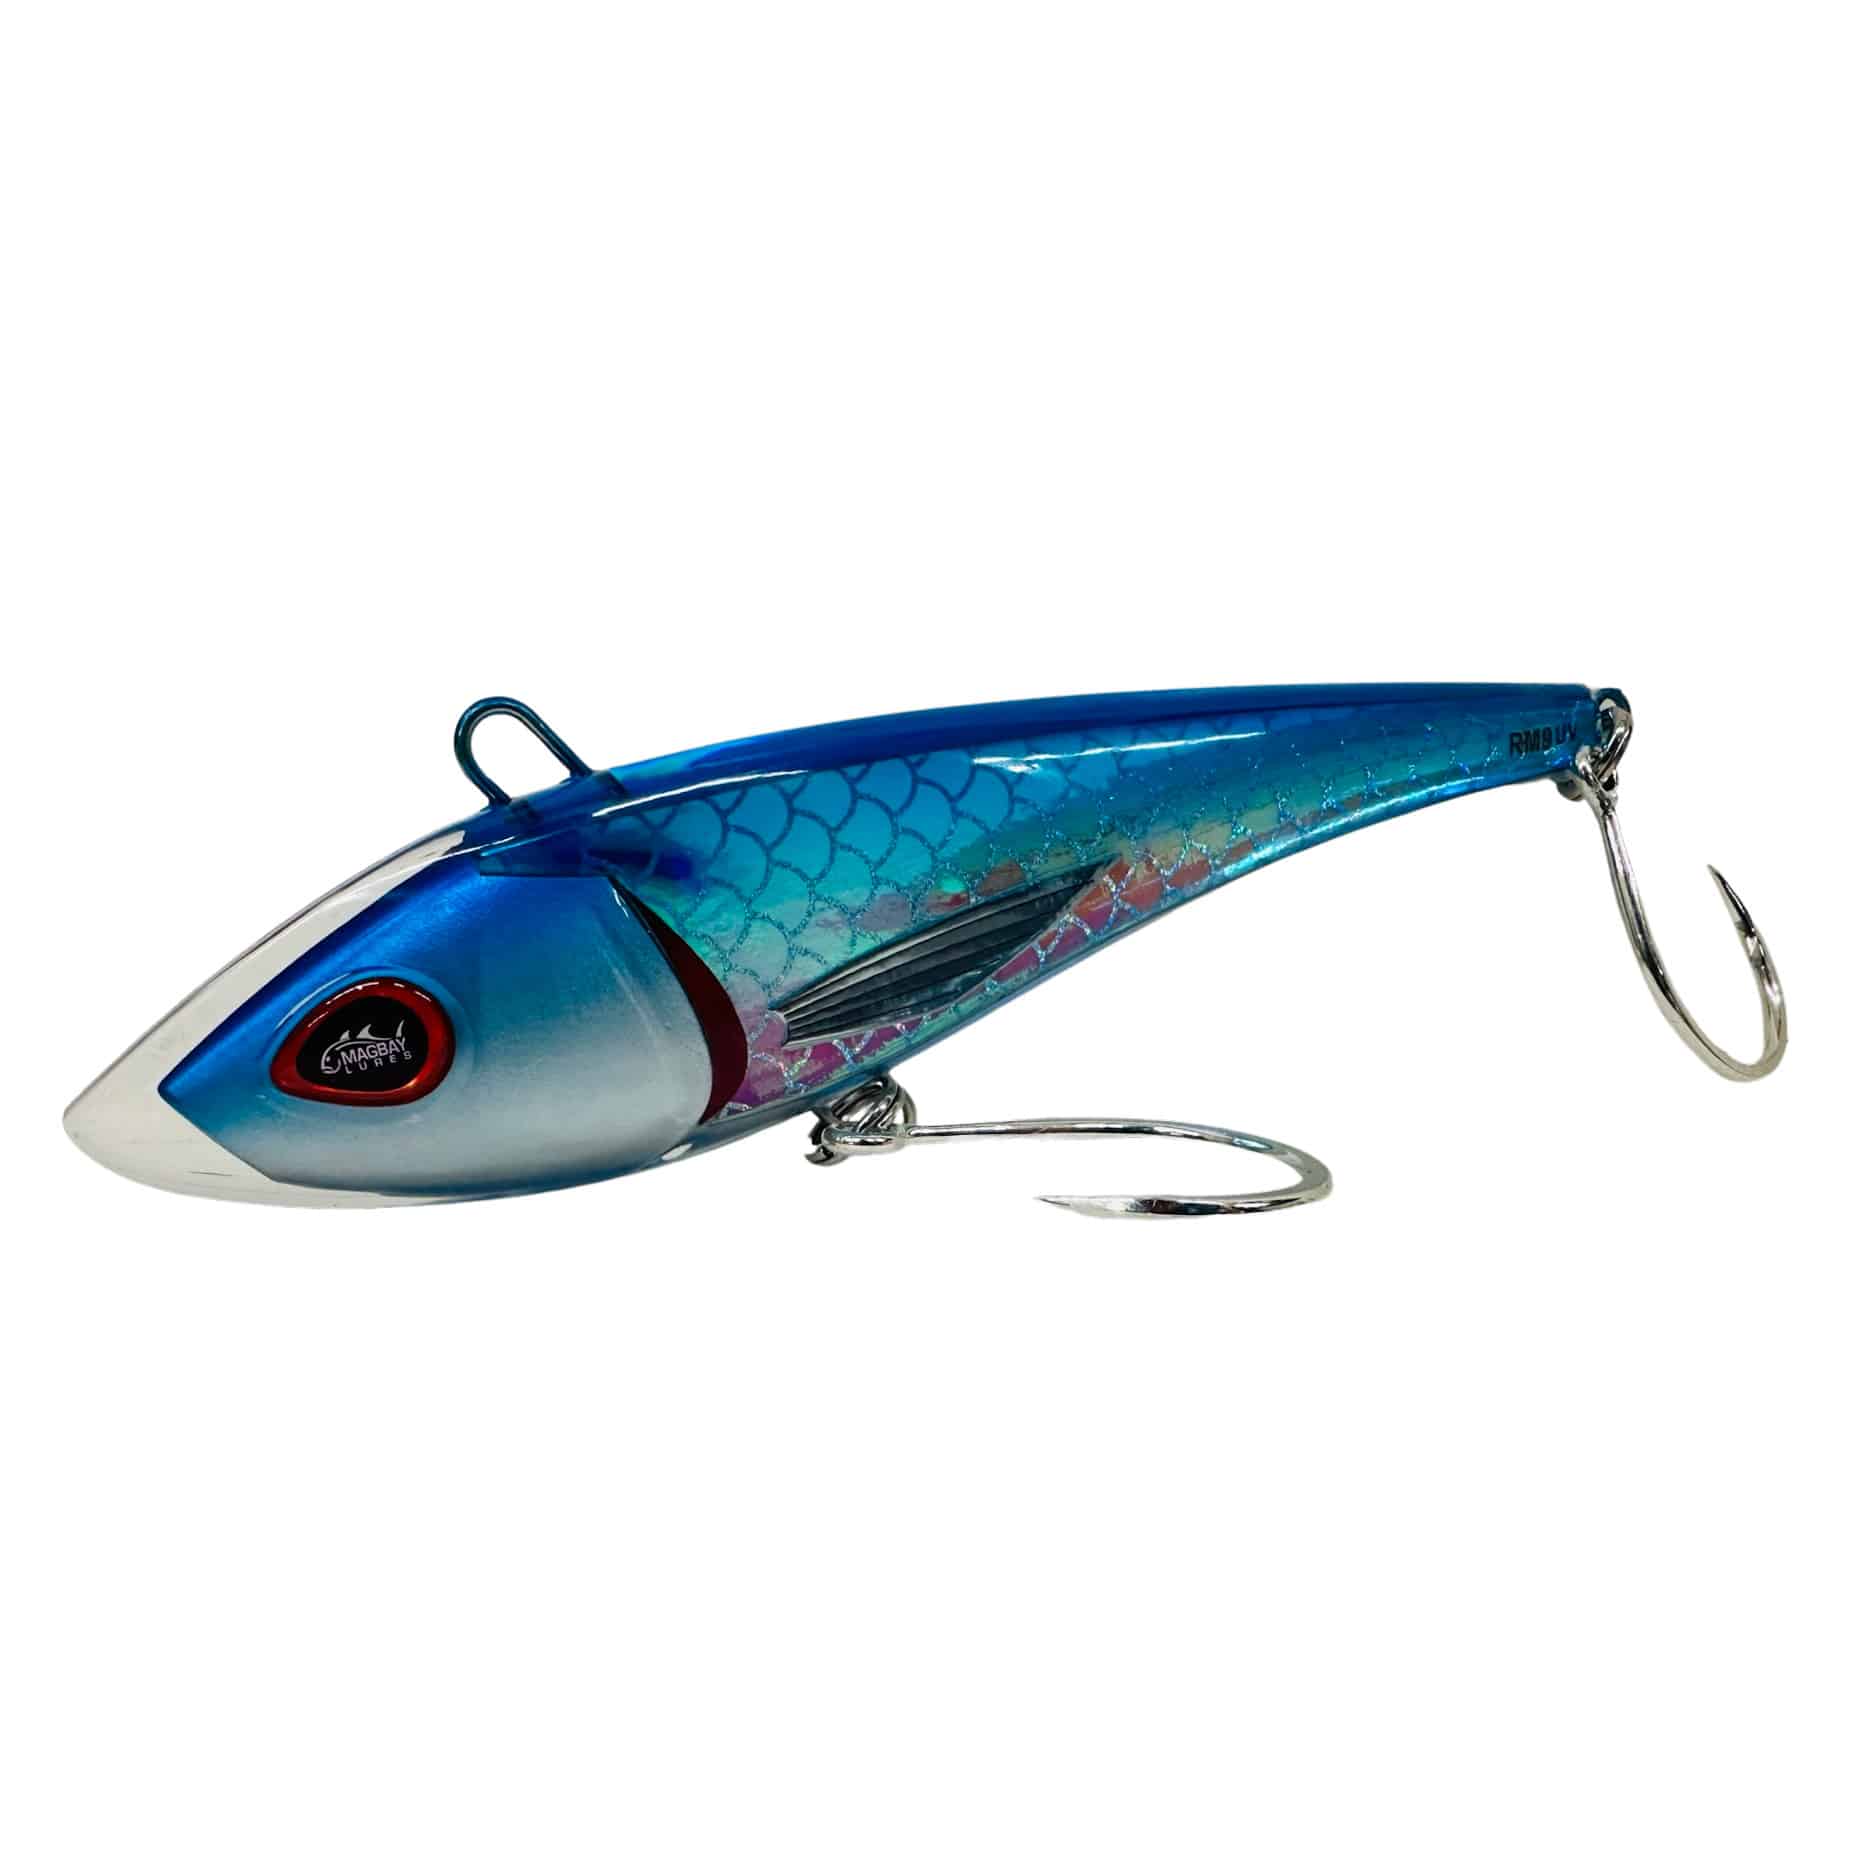  Fishing Lures Saltwater Trolling Lures Offshore Big Game Lures  for Marlin Tuna Wahoo Skirted Deep Sea Fishing Lures : Sports & Outdoors